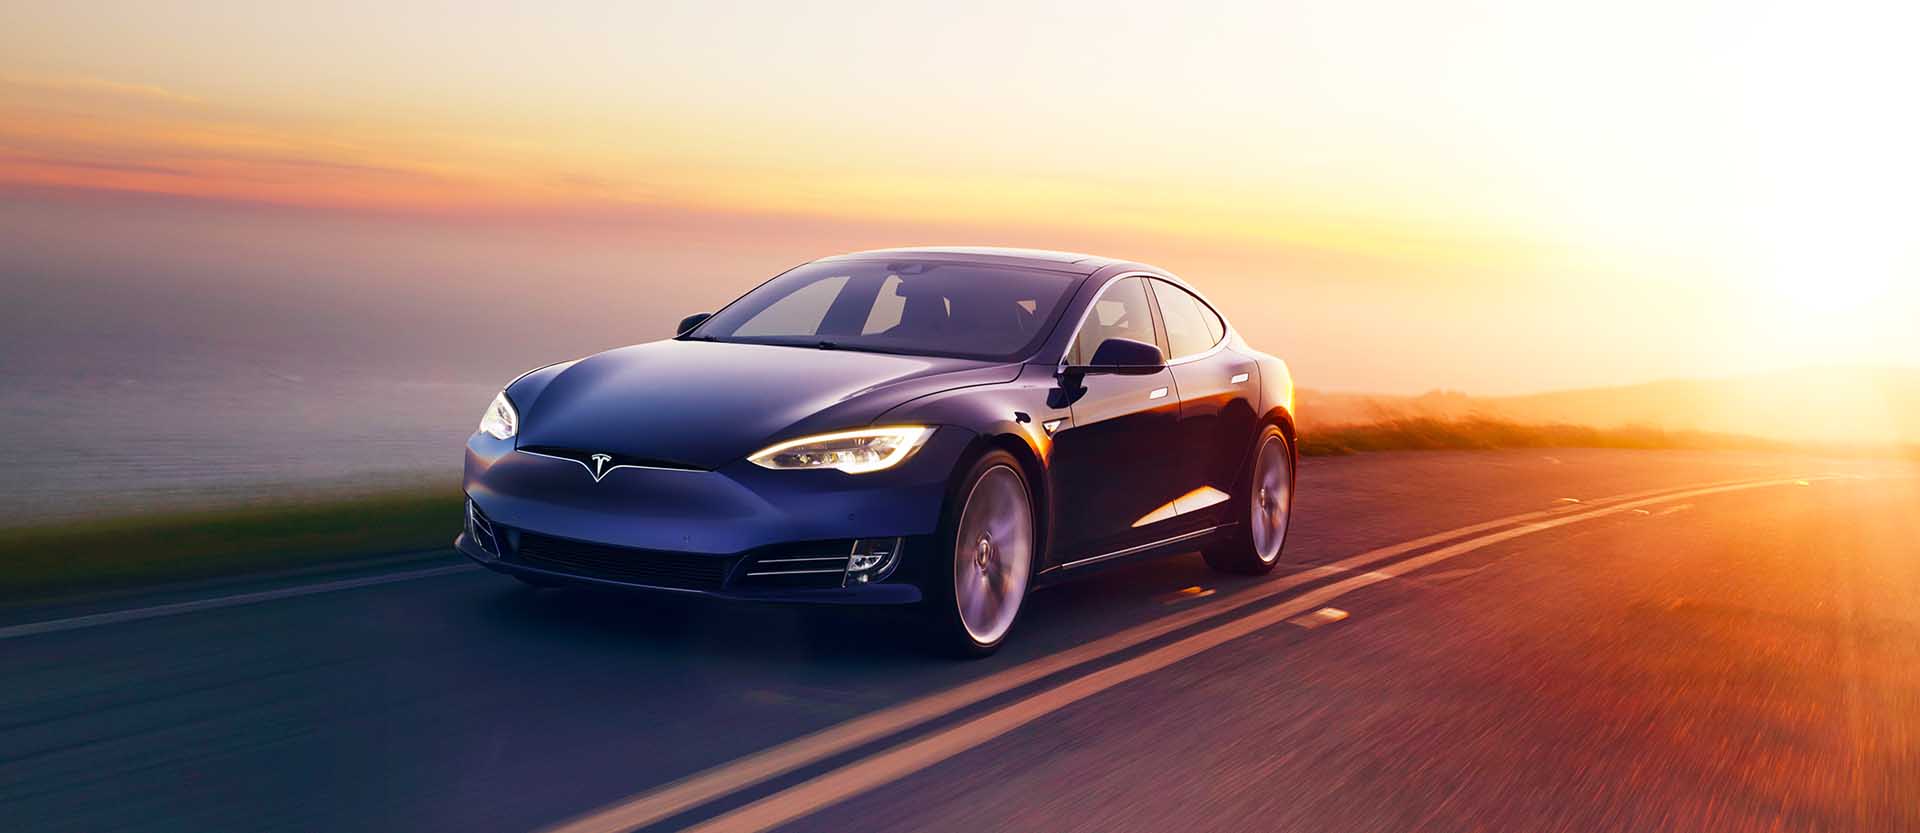 2020 Model S Ratings, Specs, Prices, and Photos - Car Connection